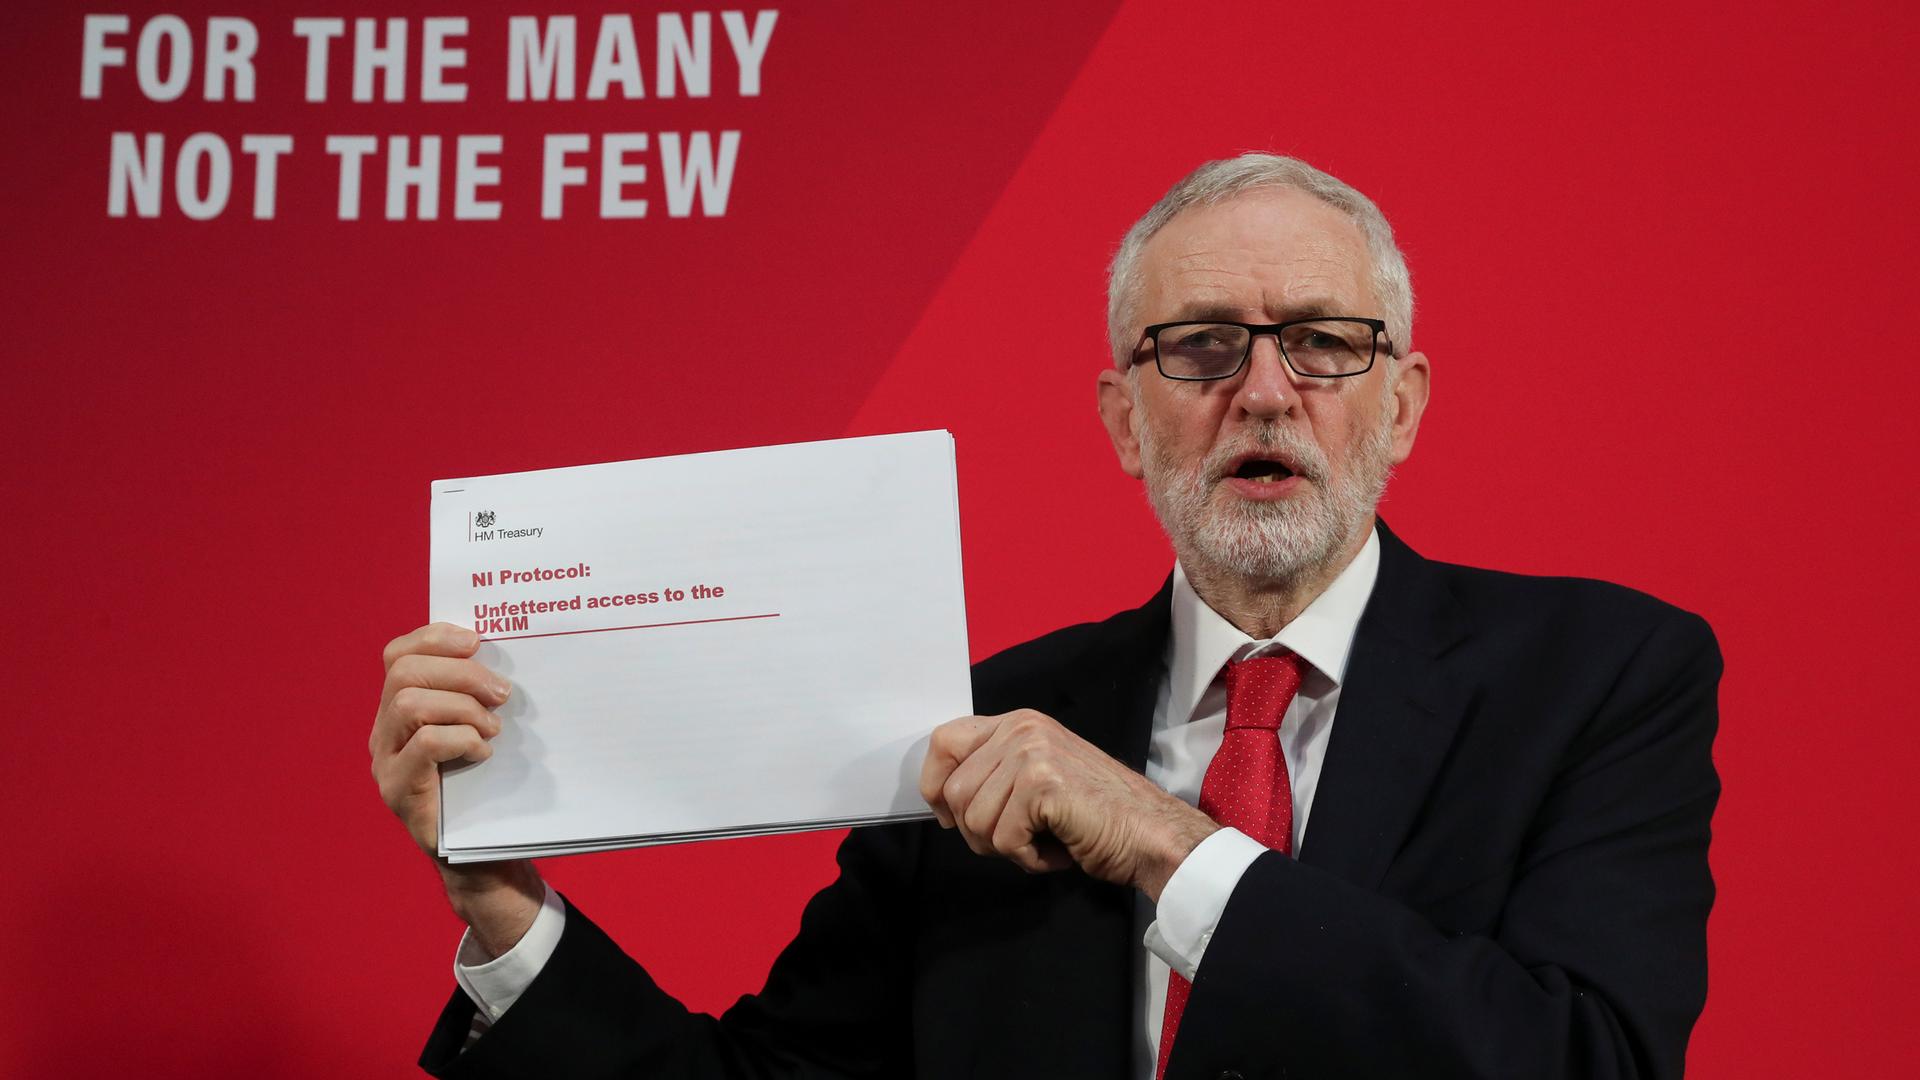 Britain's opposition Labour Party leader Jeremy Corbyn is shown holding a white piece of paper off to his side with red lettering.